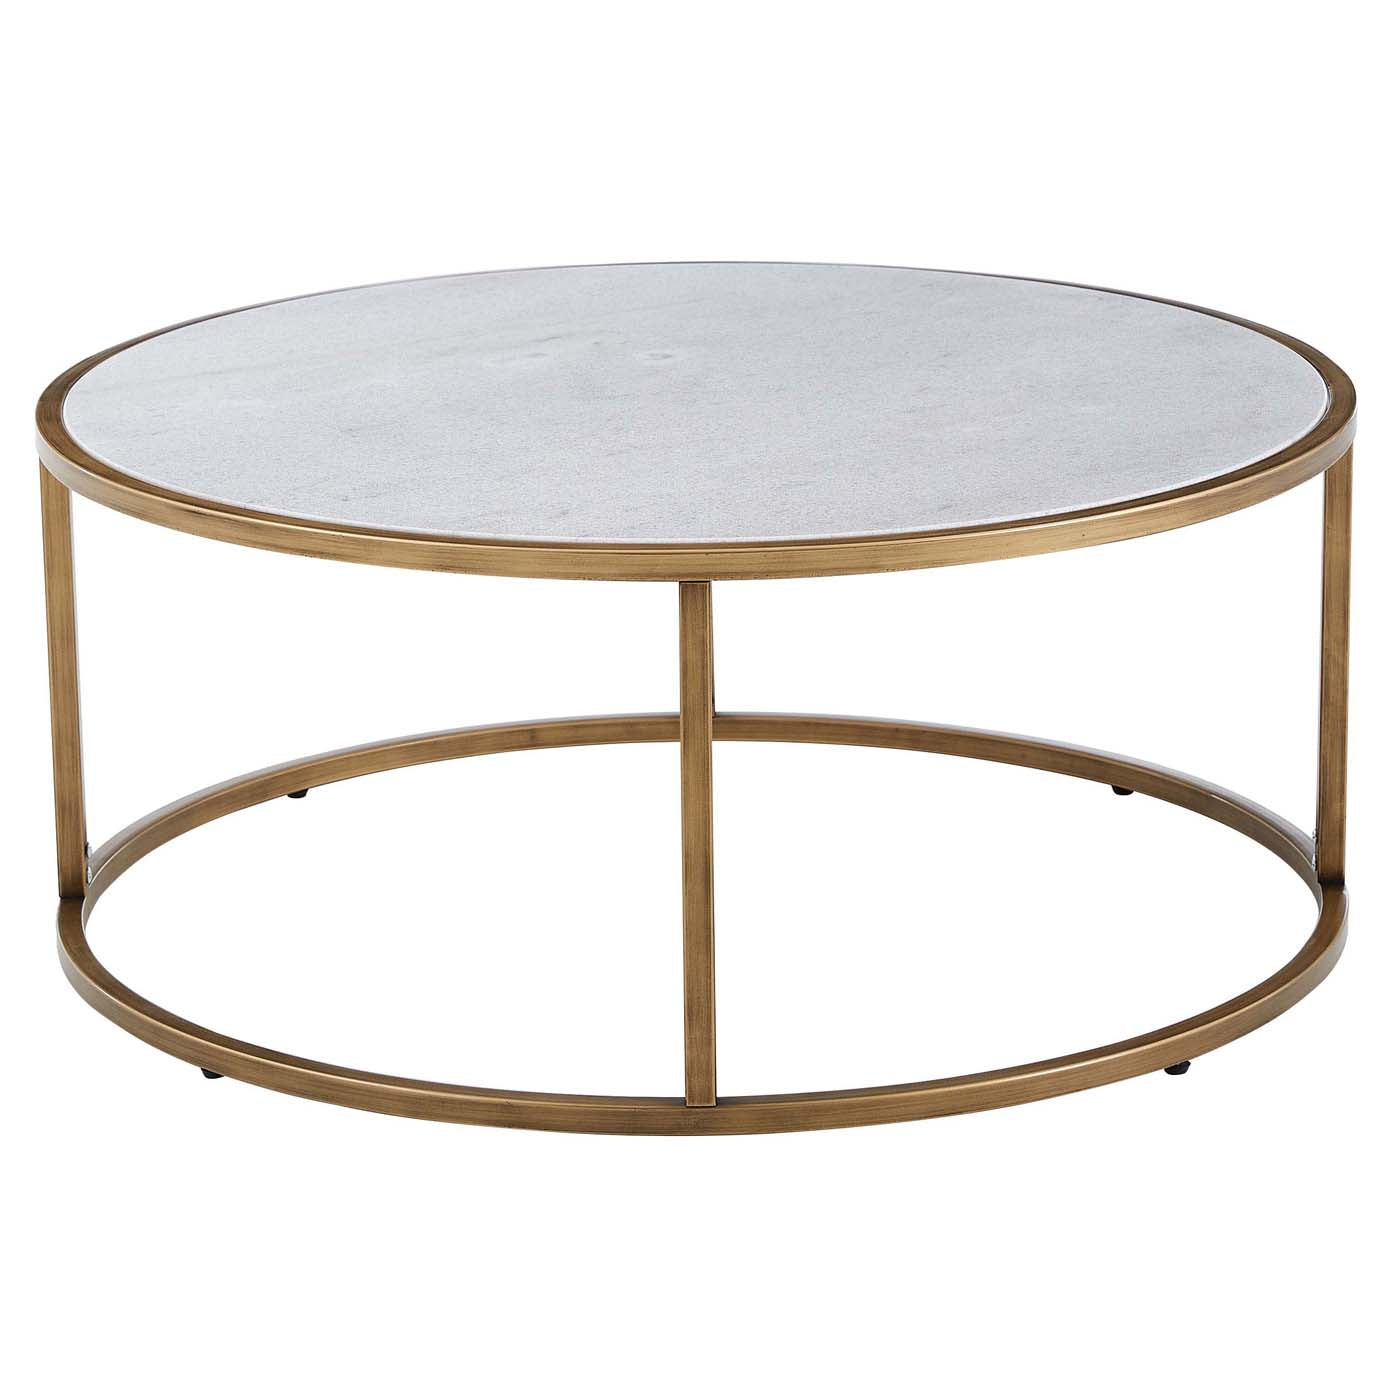 Safavieh Couture Brynna Round Marble Coffee Table - White / Bronze